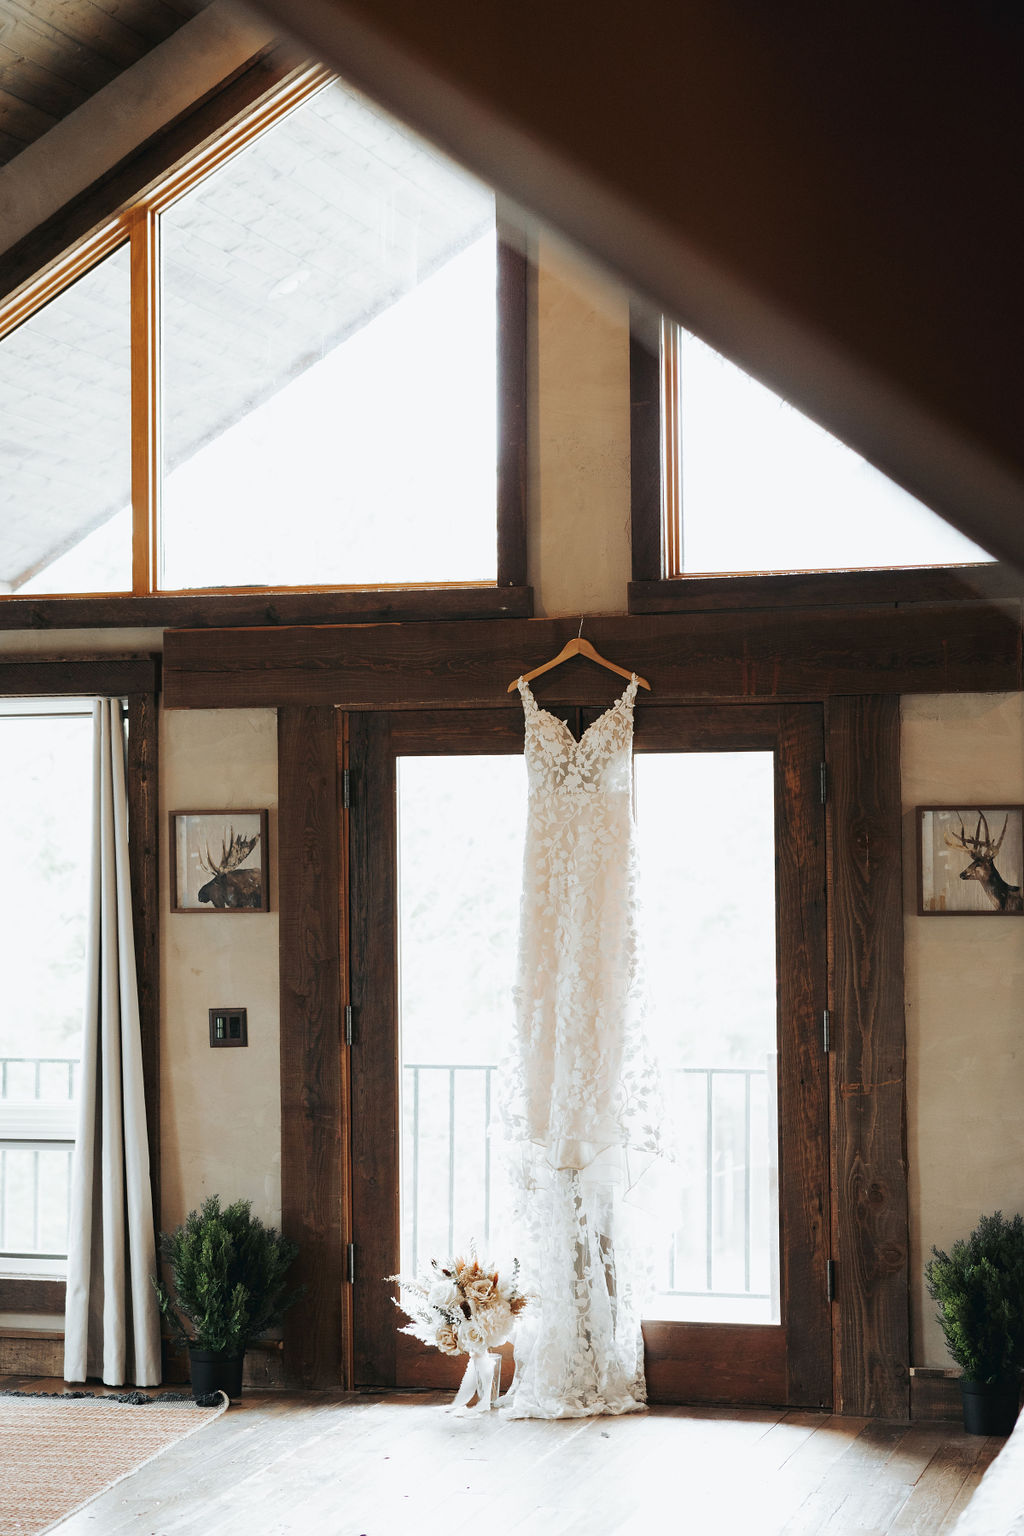 bridal wedding dress hanging up in rustic cabin